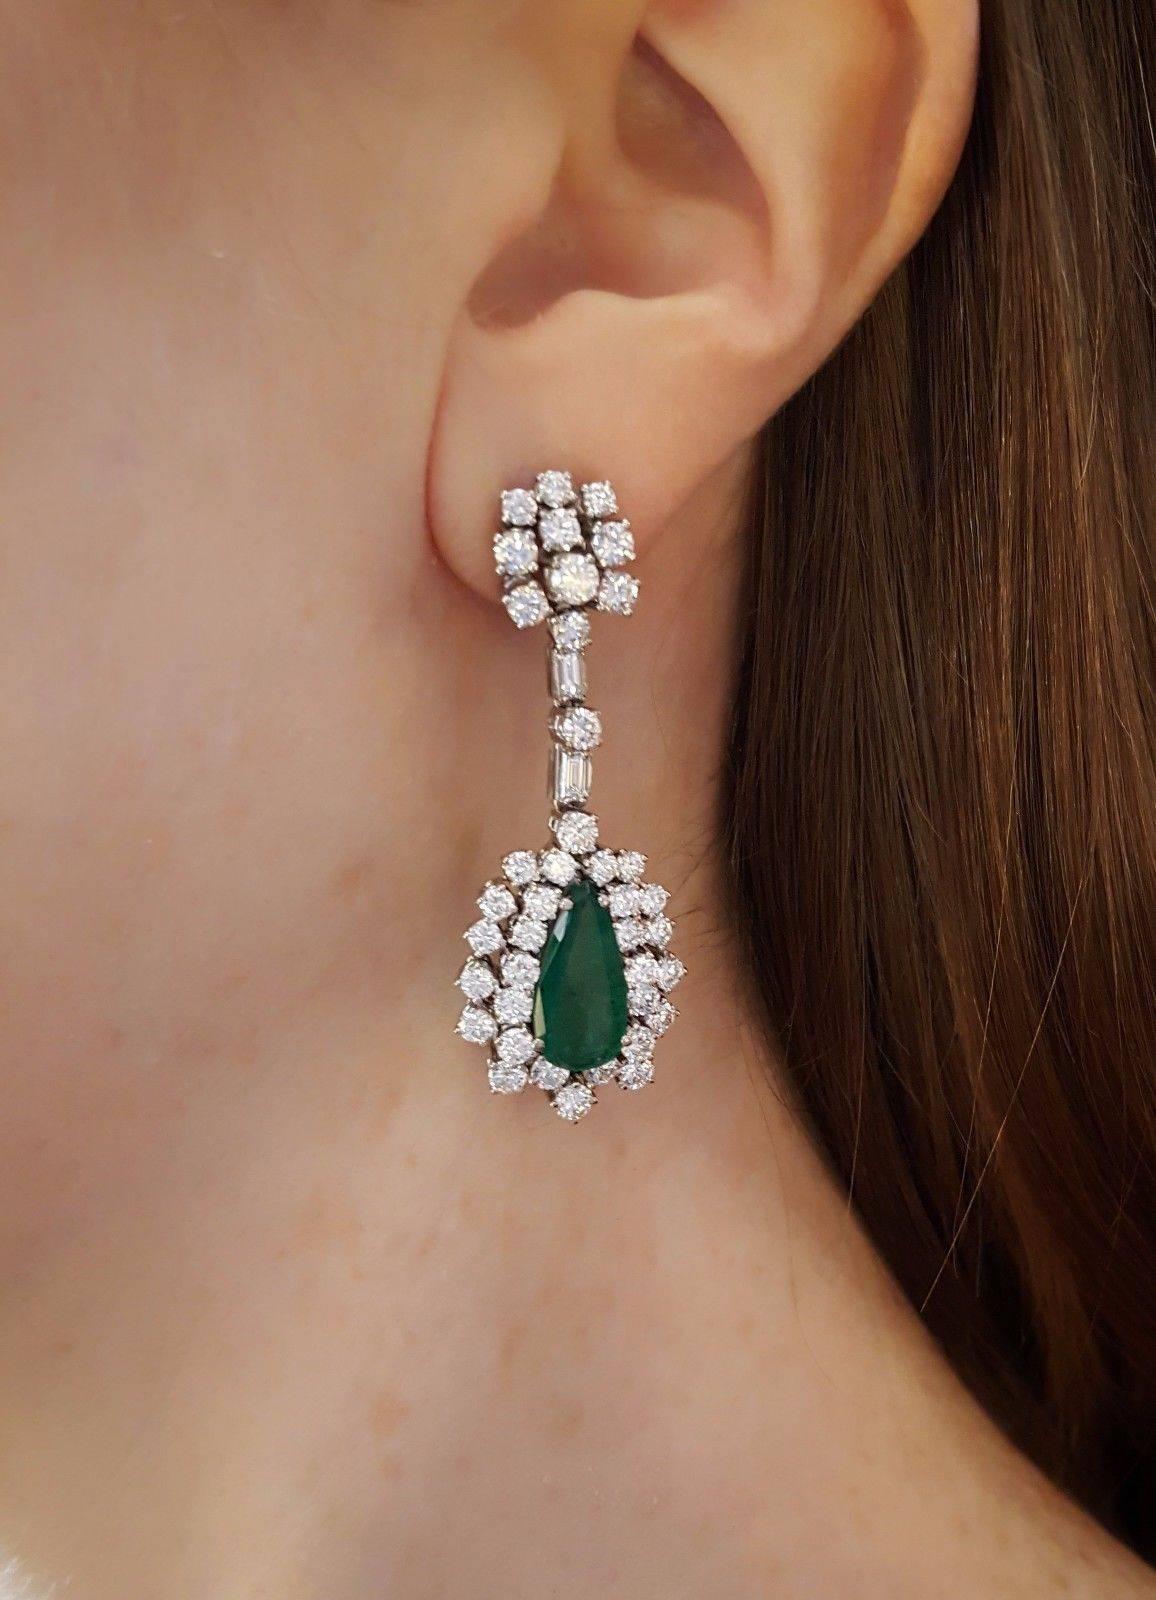 Estate  Emerald & diamond drop earrings featuring two (2) Pear Shaped Emeralds, with lively medium to deep green color weighing approx total Weight of 4.00 carats.  Side stones consist of round brilliant cut diamonds and baguette diamonds,